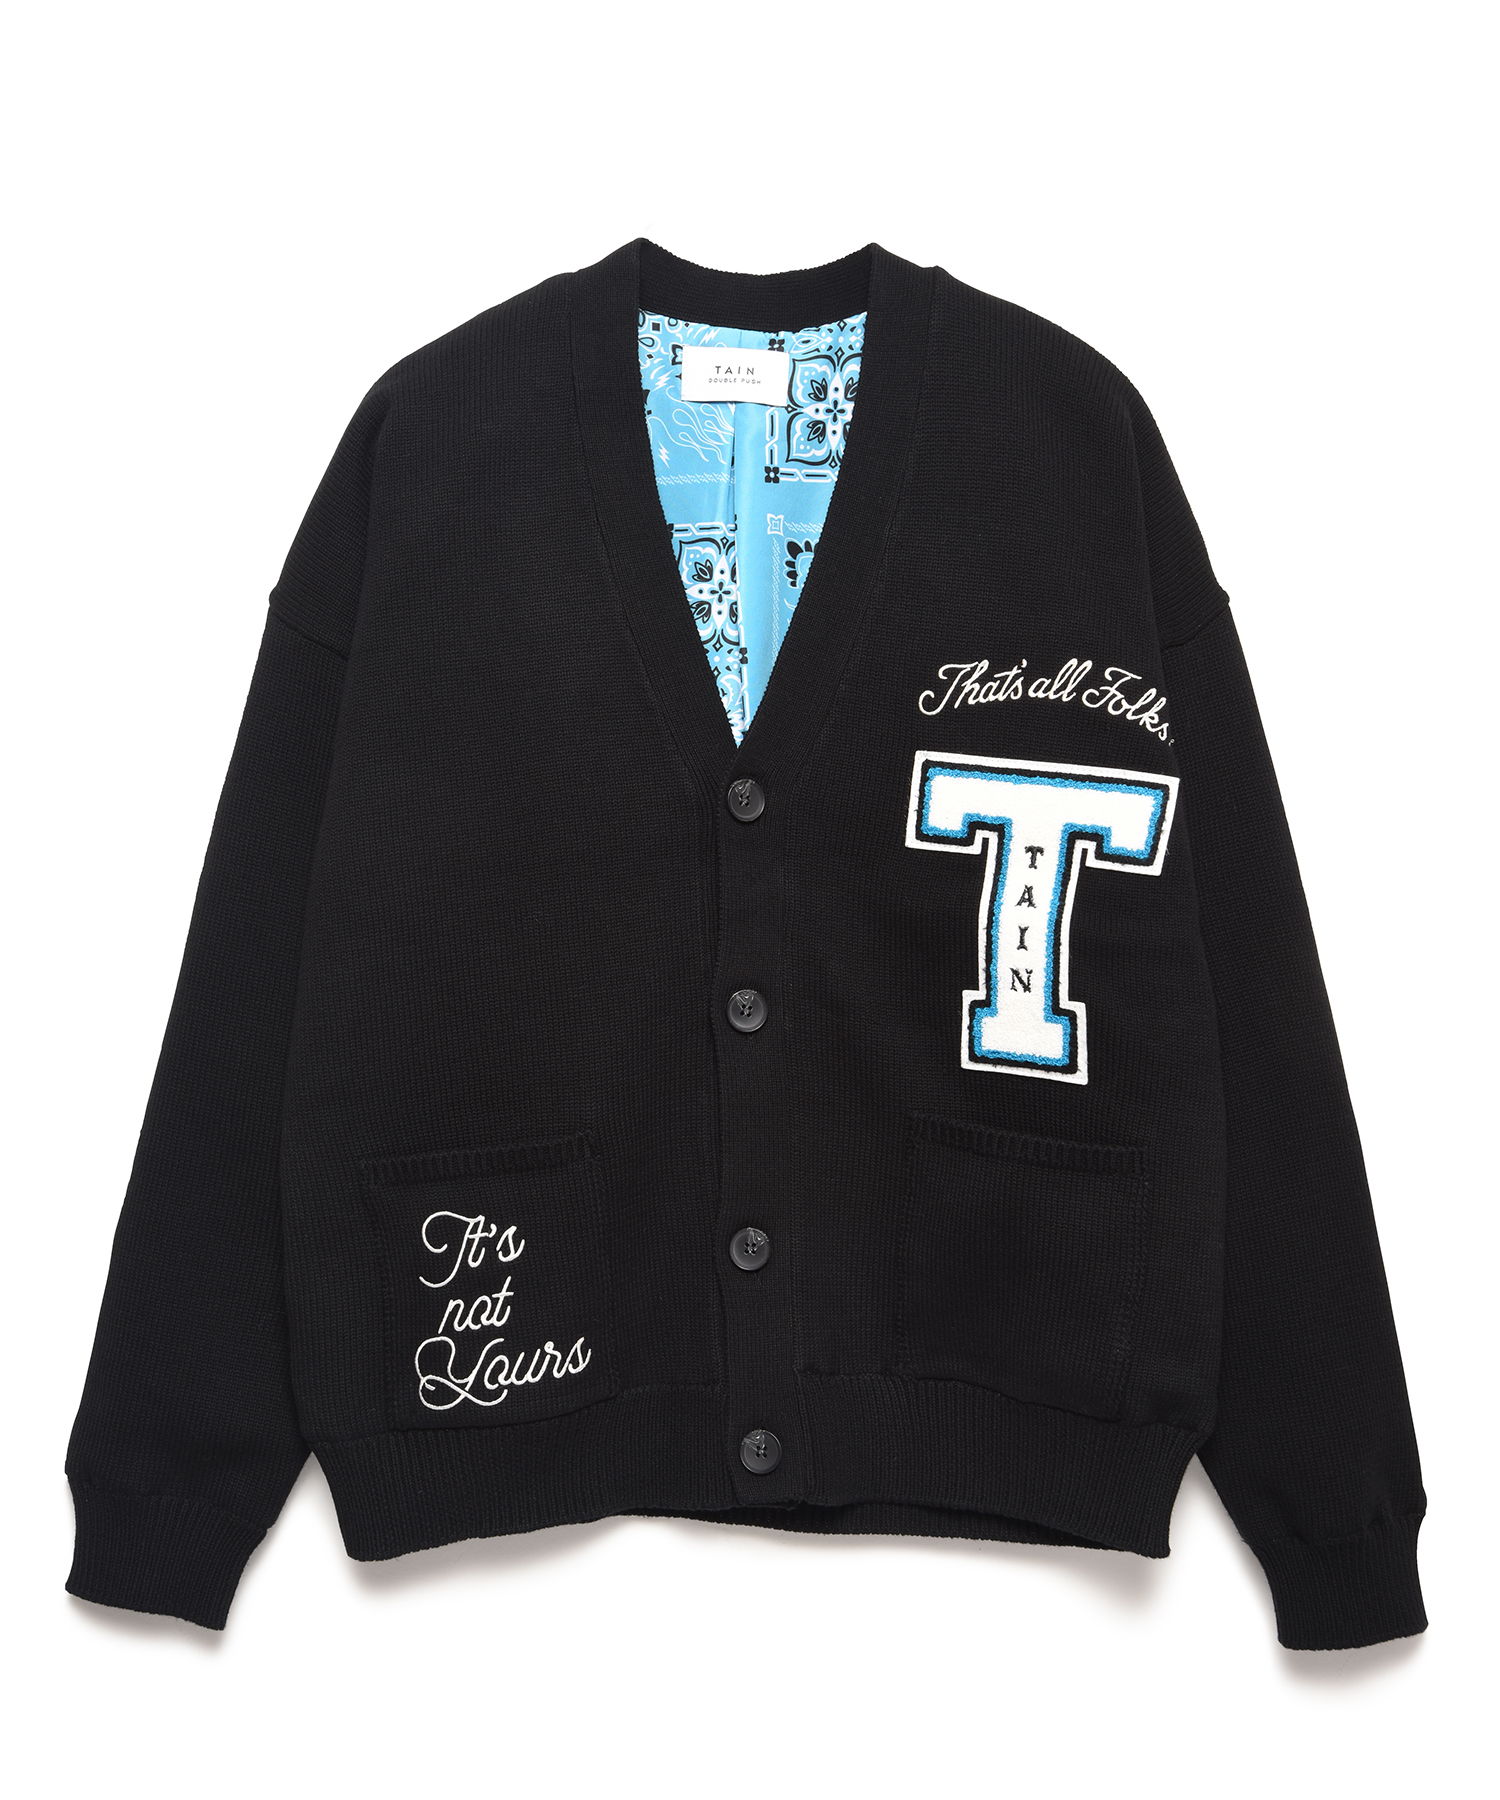 TAIN DOUBLE PUSH | THAT'S ALL FOLKS CARDIGAN